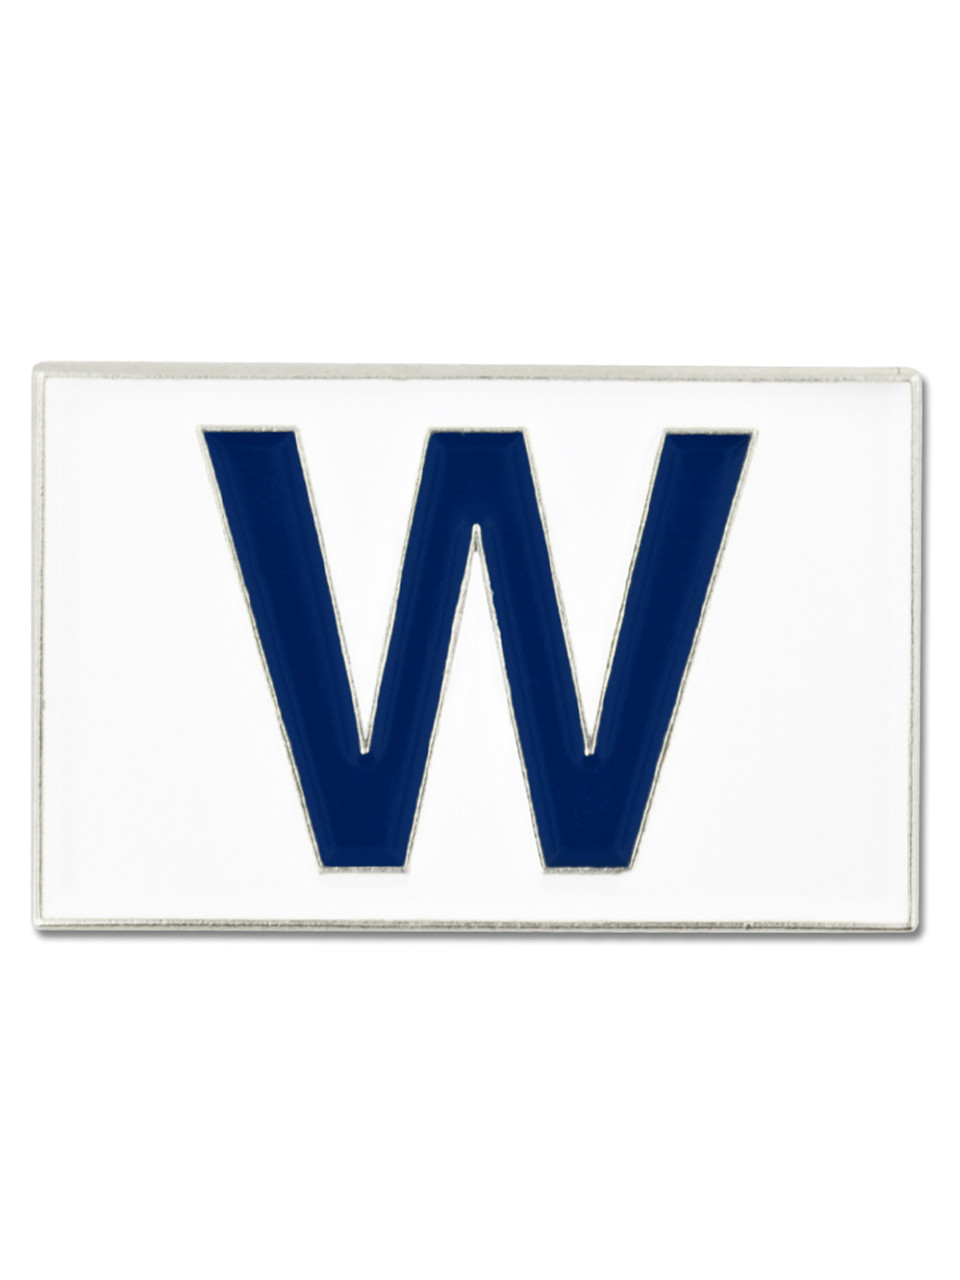 PinMart Pinmart's Chicago Baseball Fly The W Cubs Win Flag Enamel Lapel Pin, Adult Unisex, Size: 1, Grey Type